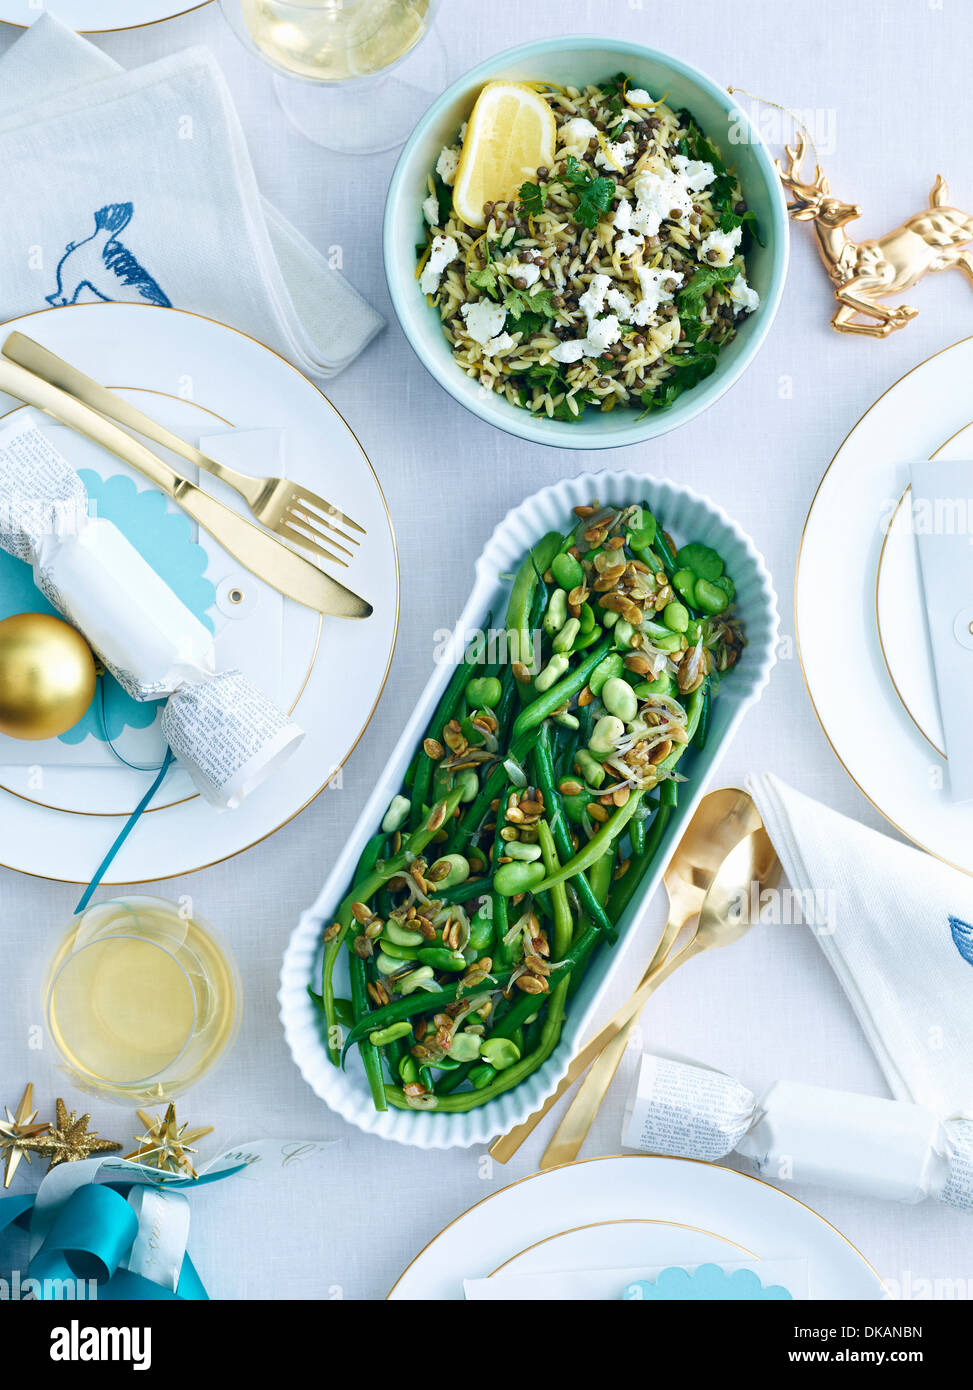 Dishes of lemon orzo and green beans on decorated table Stock Photo